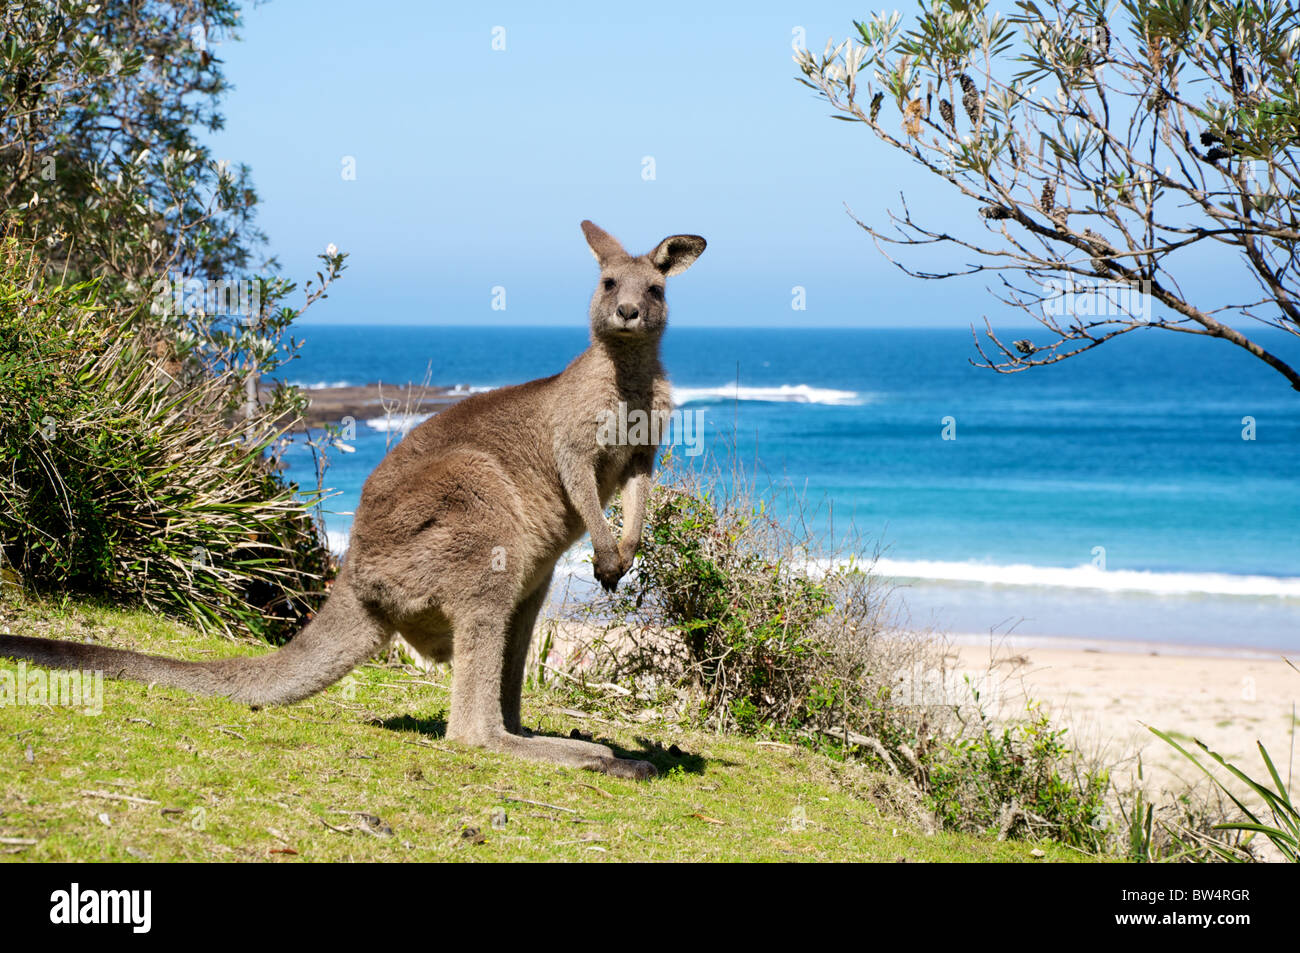 Australian kangaroo on a patch of grass in front of the beach with the ocean as background. Stock Photo